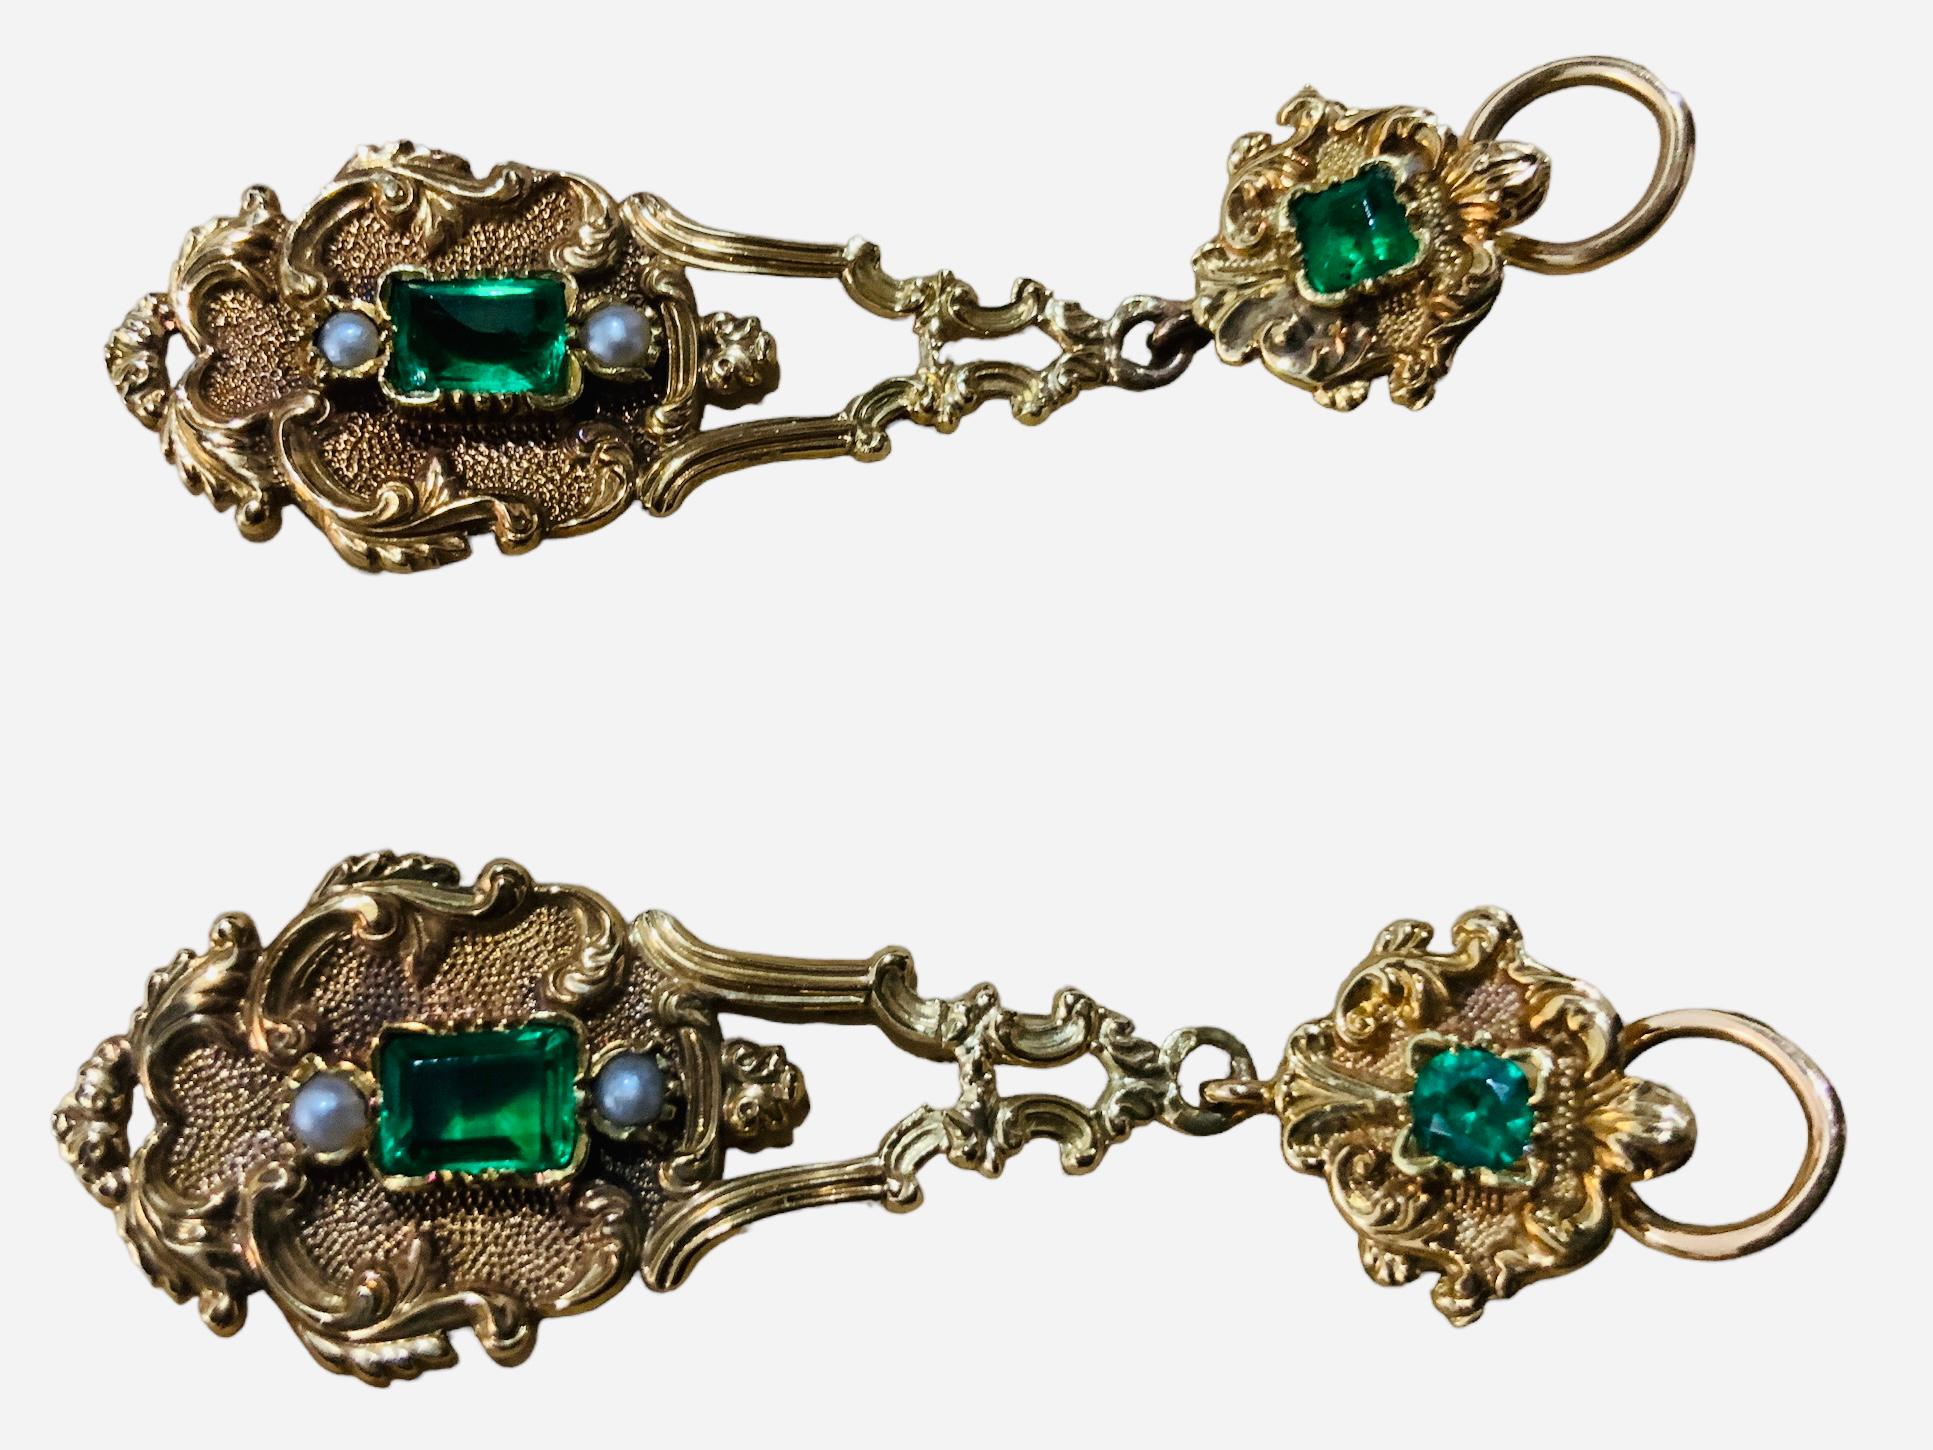 This is a Victorian 18K Gold and Green Glass Pair of Drop Earrings. It depicts two emerald cut green glasses, the lower one bigger than the upper one surrounded by 18K yellow gold flowery details and scrolls of acanthus leaves. Two seed pearls also